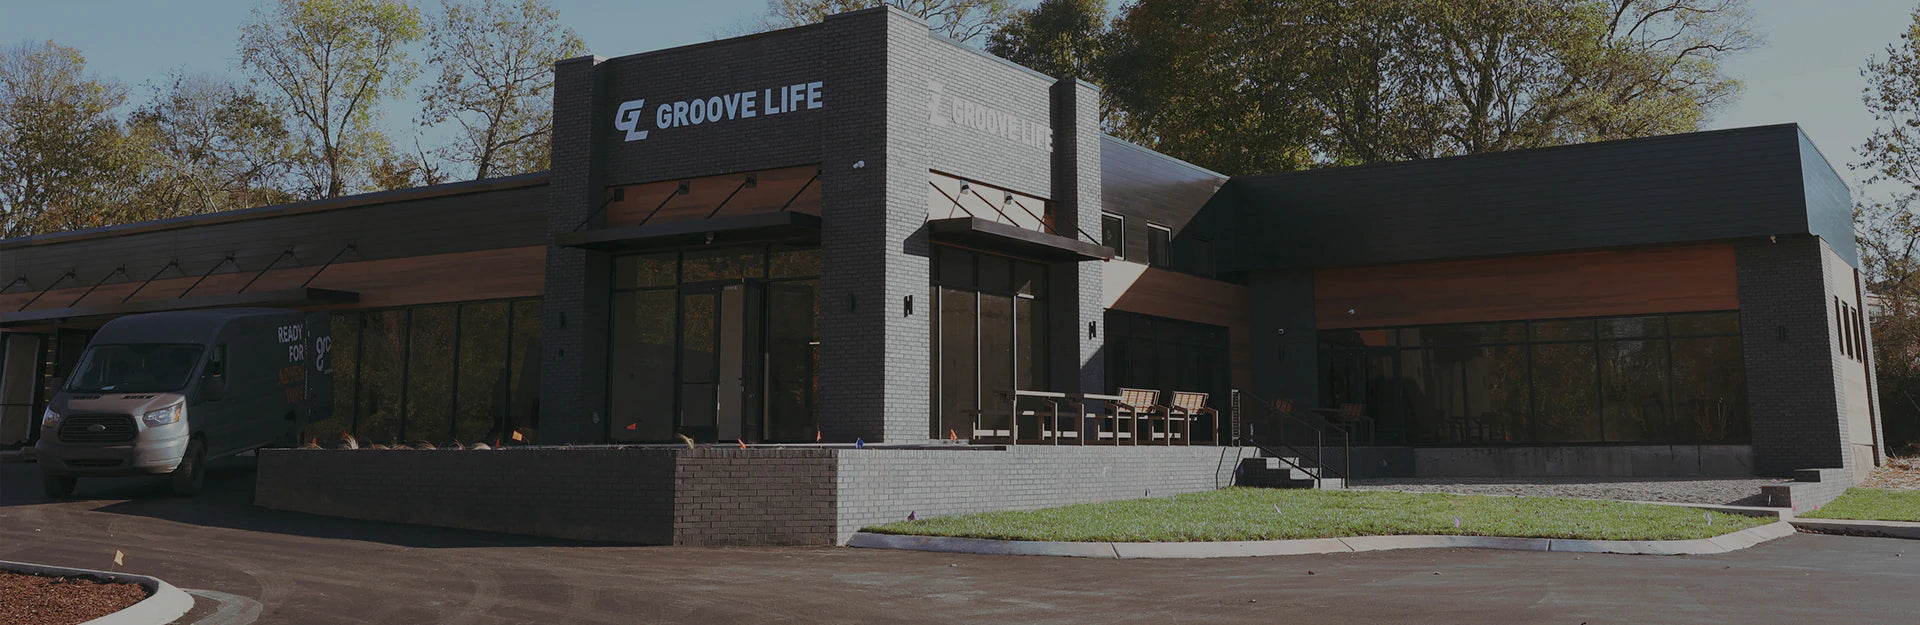 image of the groove life headquarters